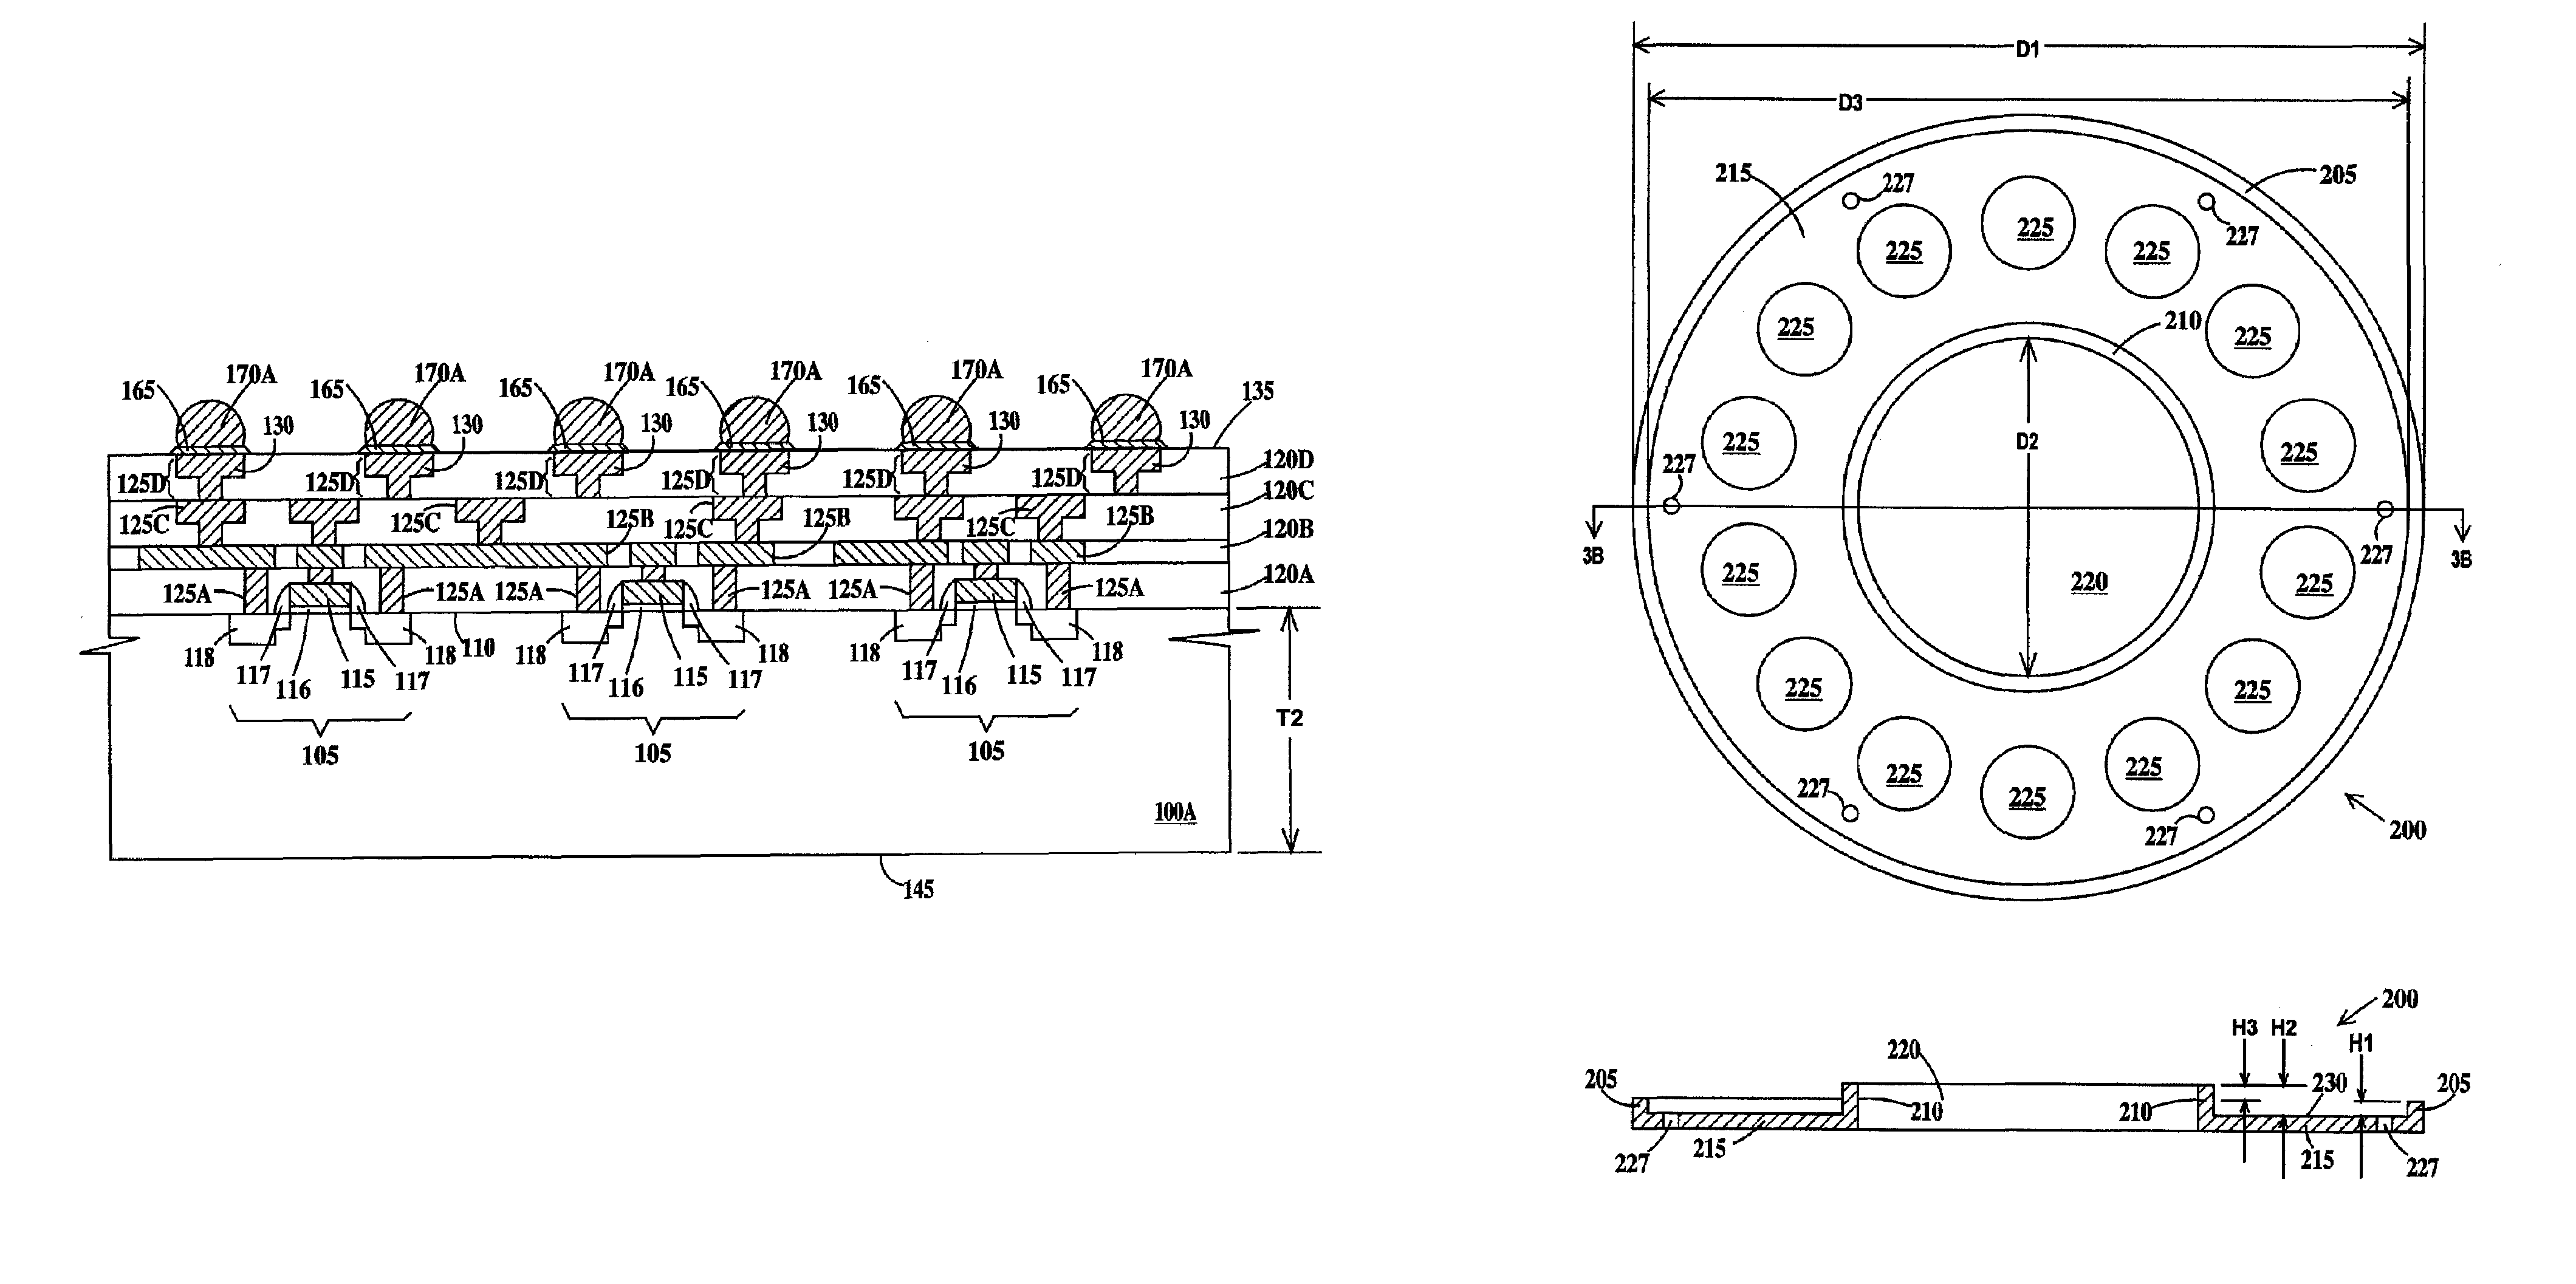 Method for forming interconnects on thin wafers